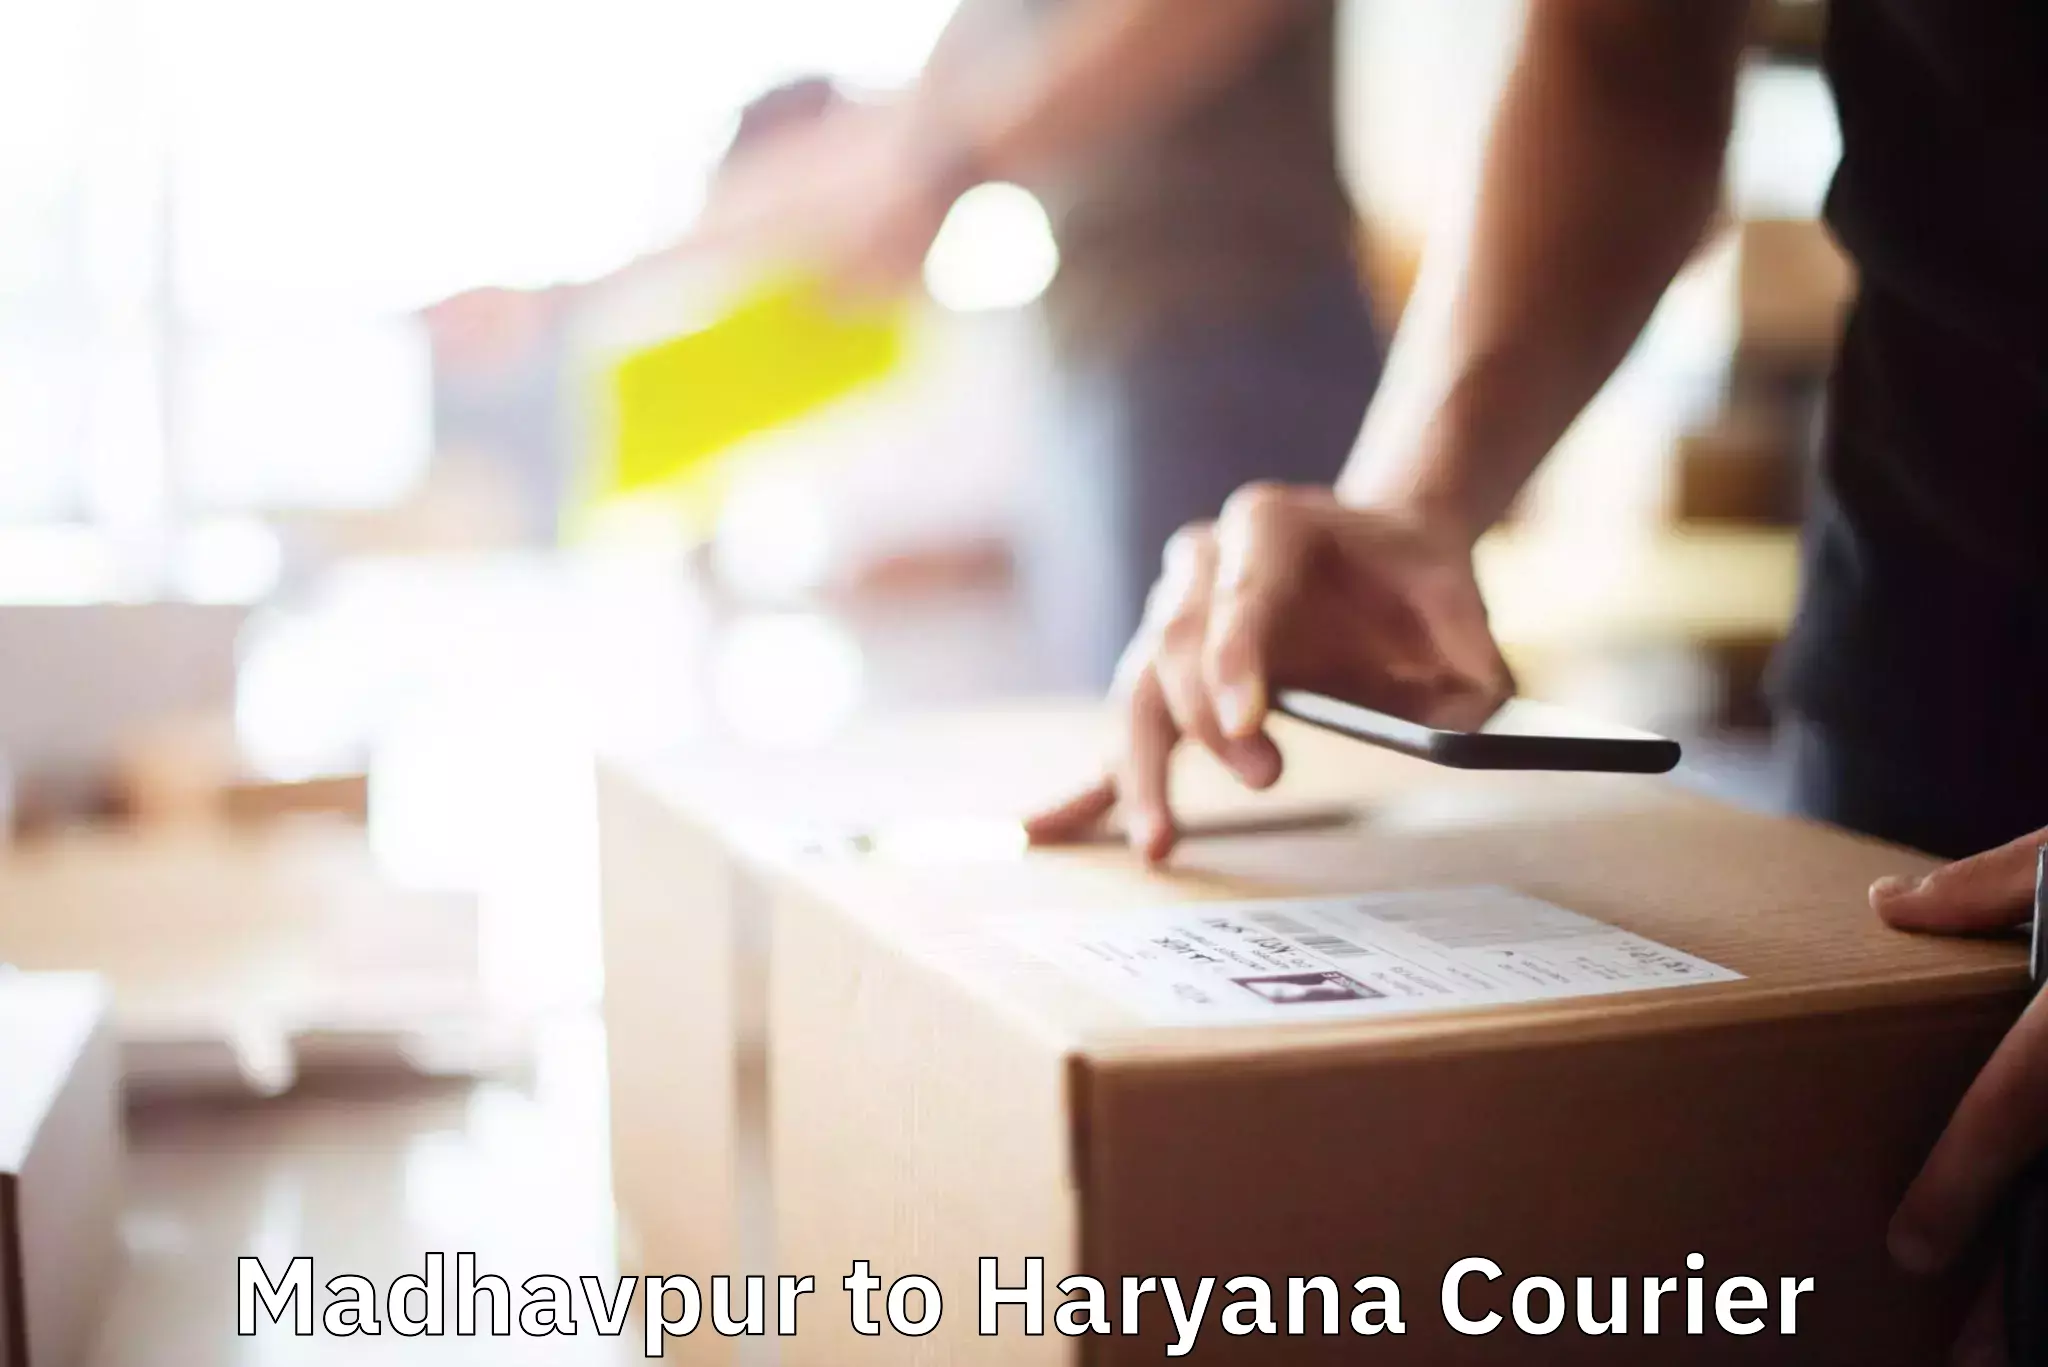 High-quality moving services Madhavpur to NCR Haryana